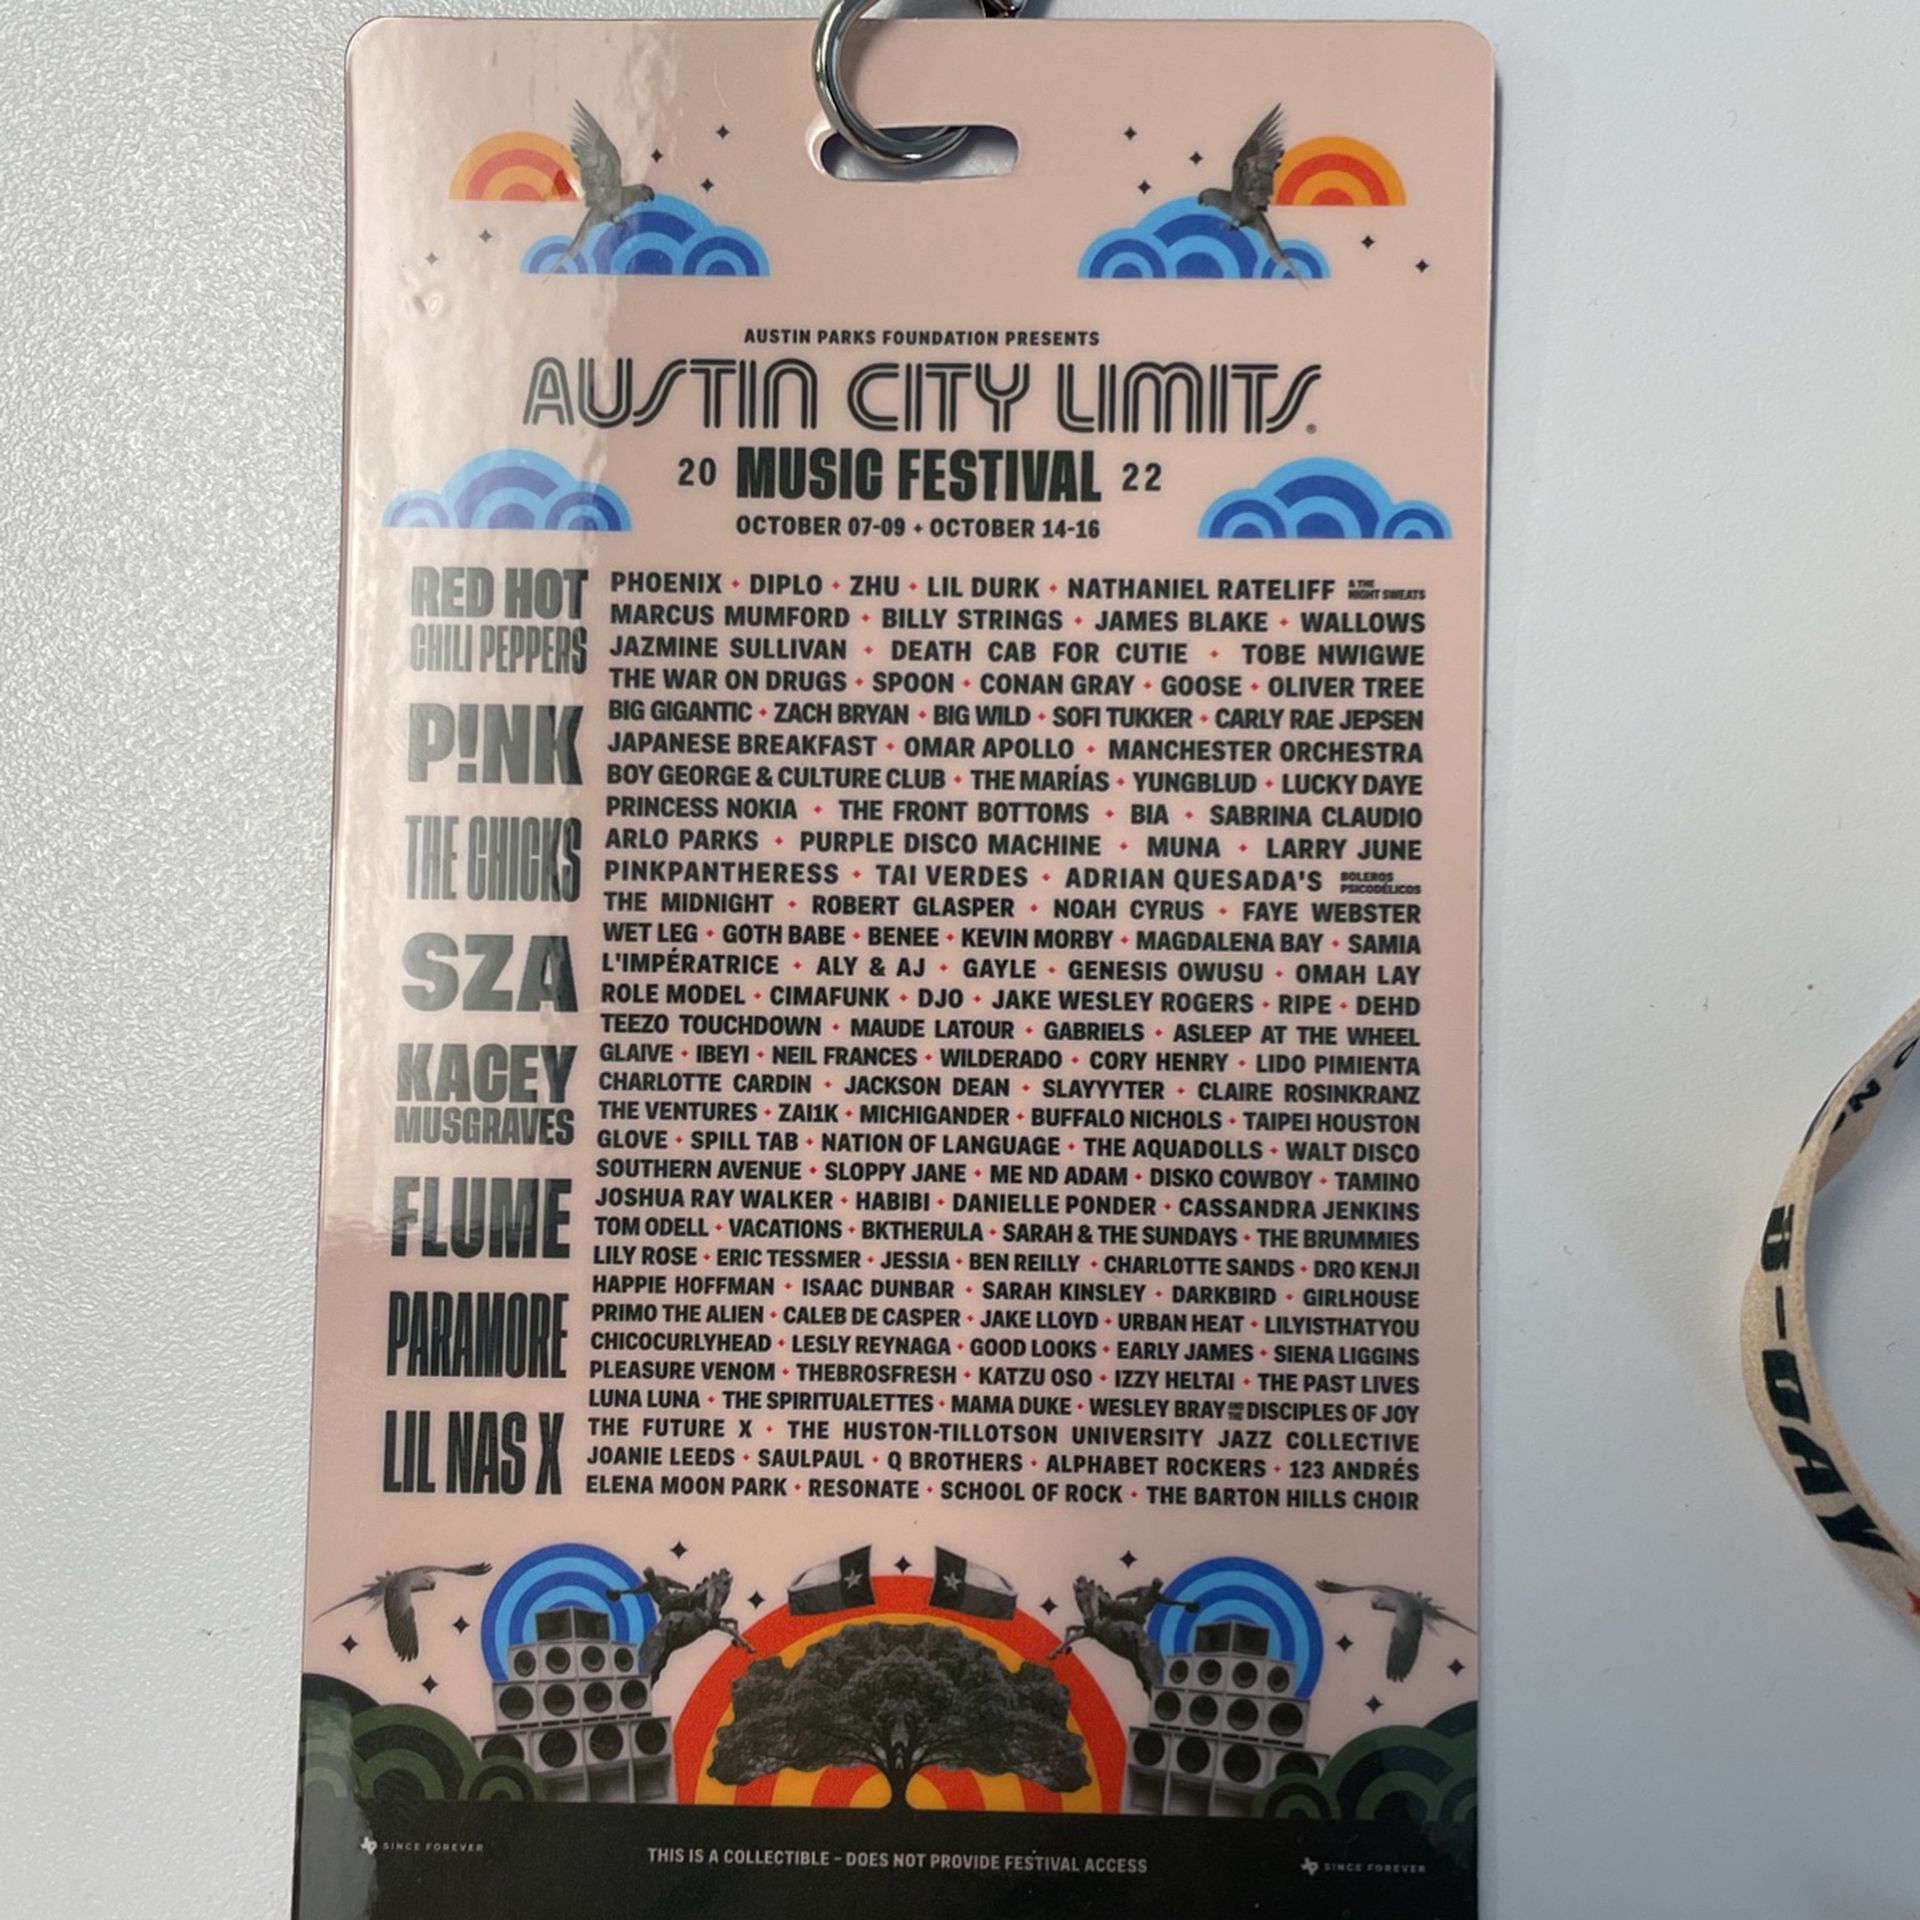 ACL - Austin City Limits - Weekend One Wristband 